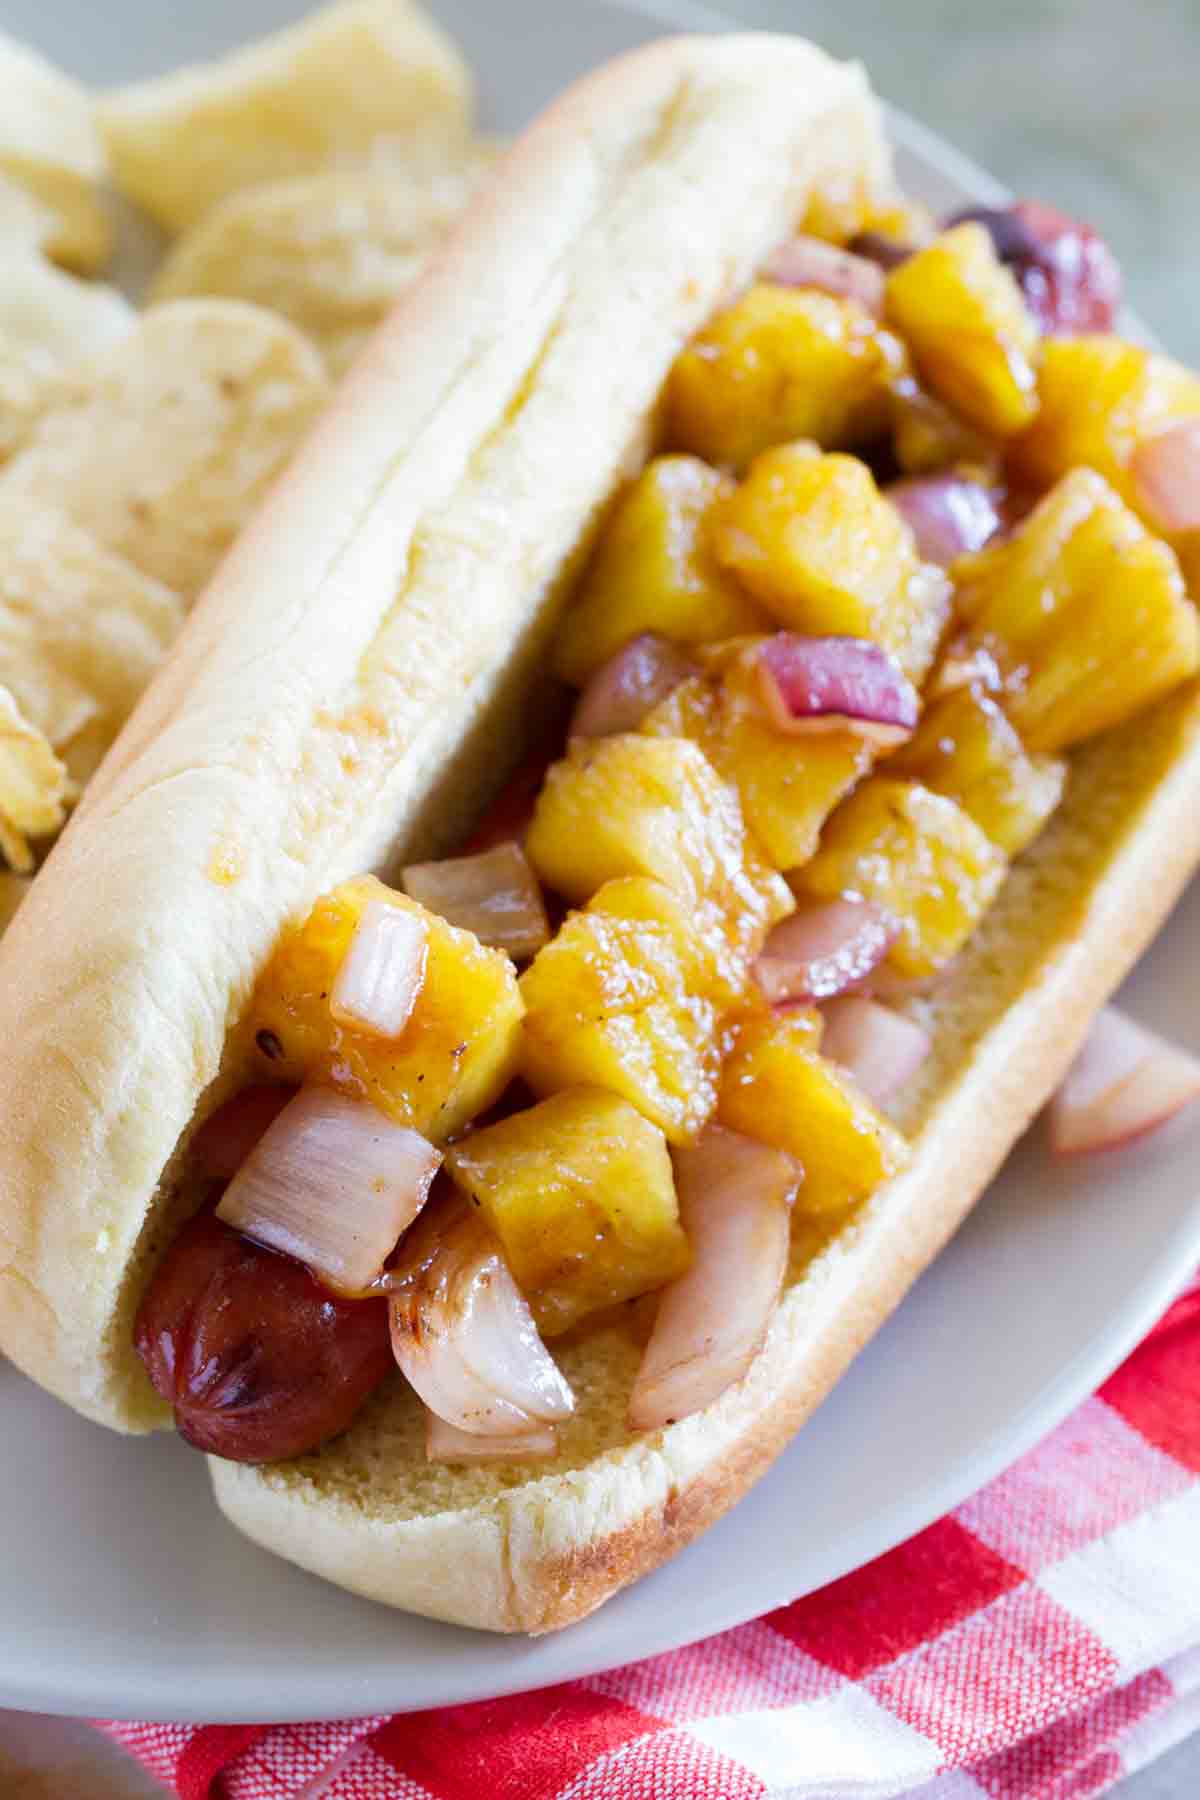 A hot dog topped with pineapple and onions.